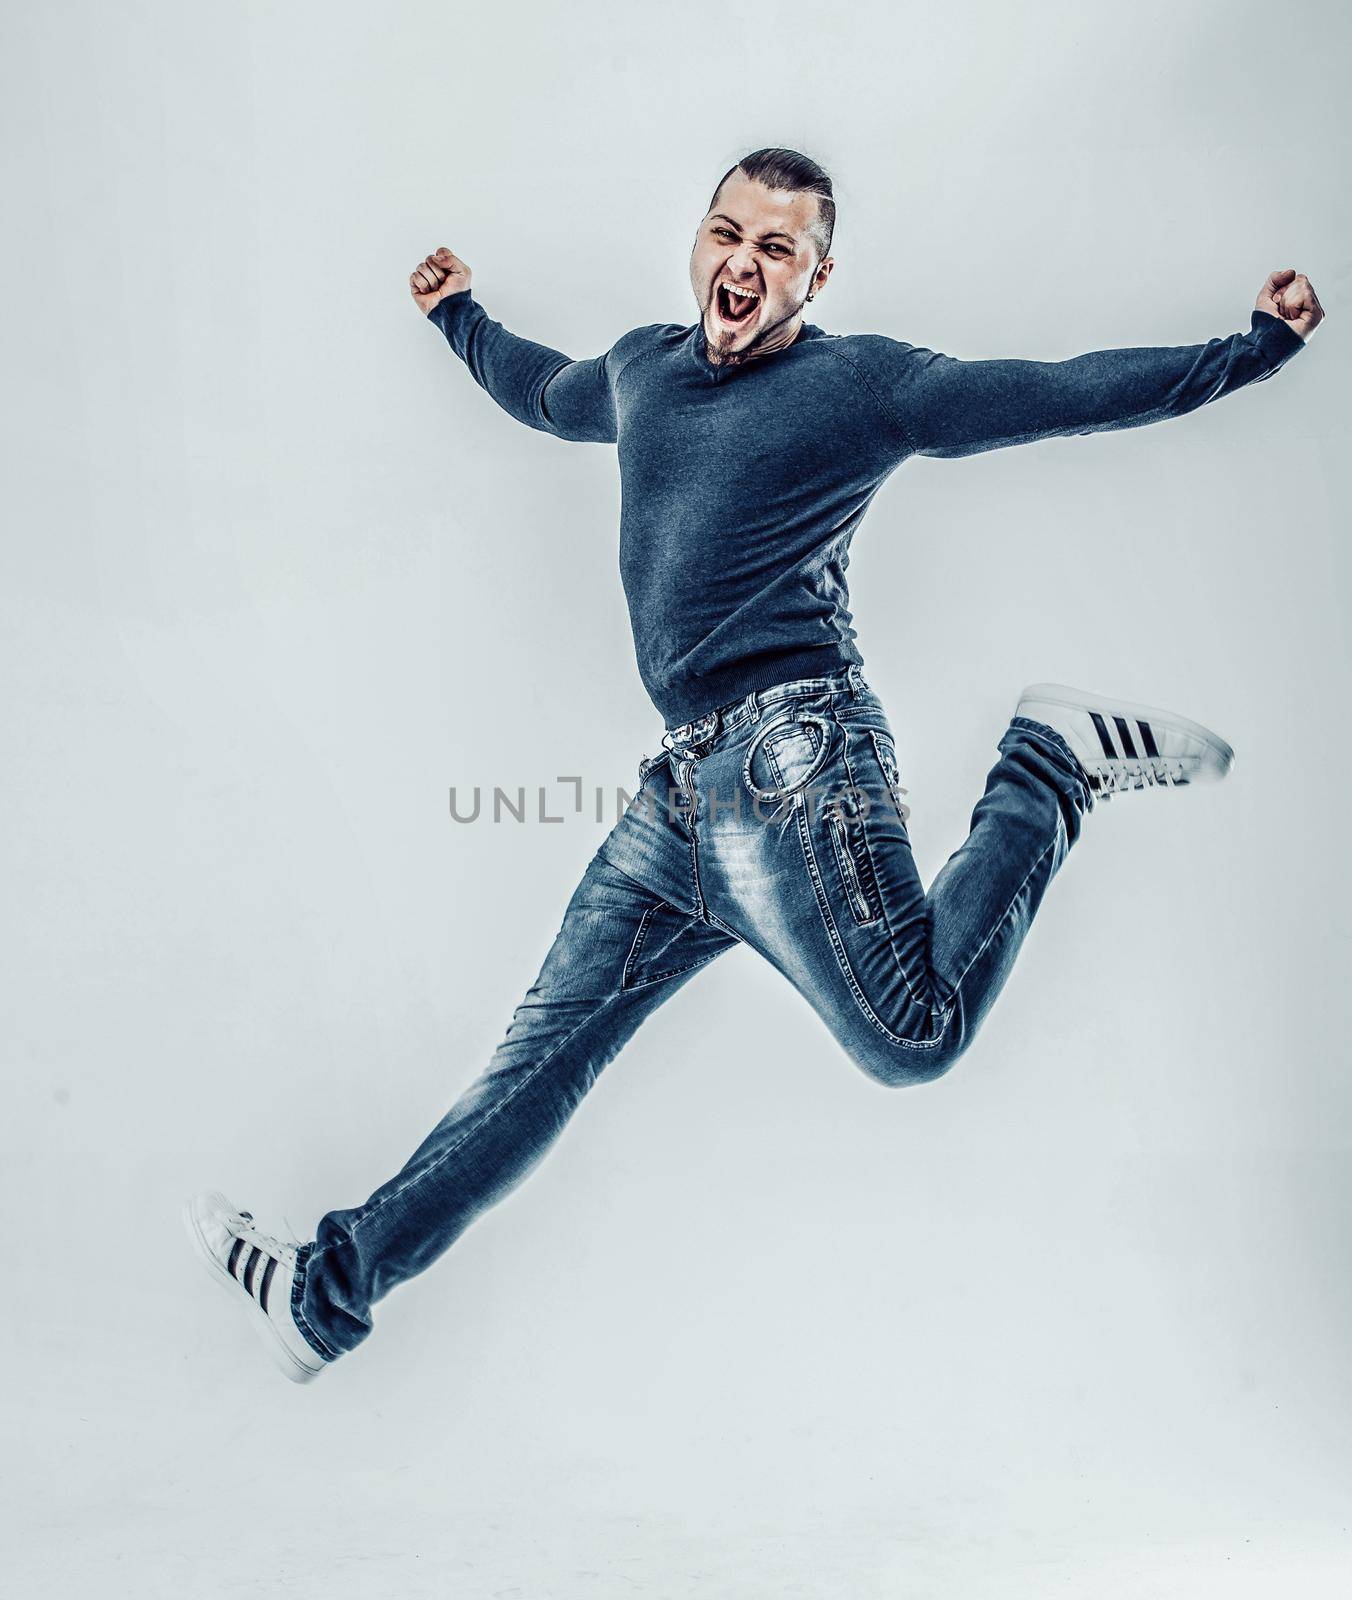 A young boy jumps for joy and happiness and raises his hands up by SmartPhotoLab